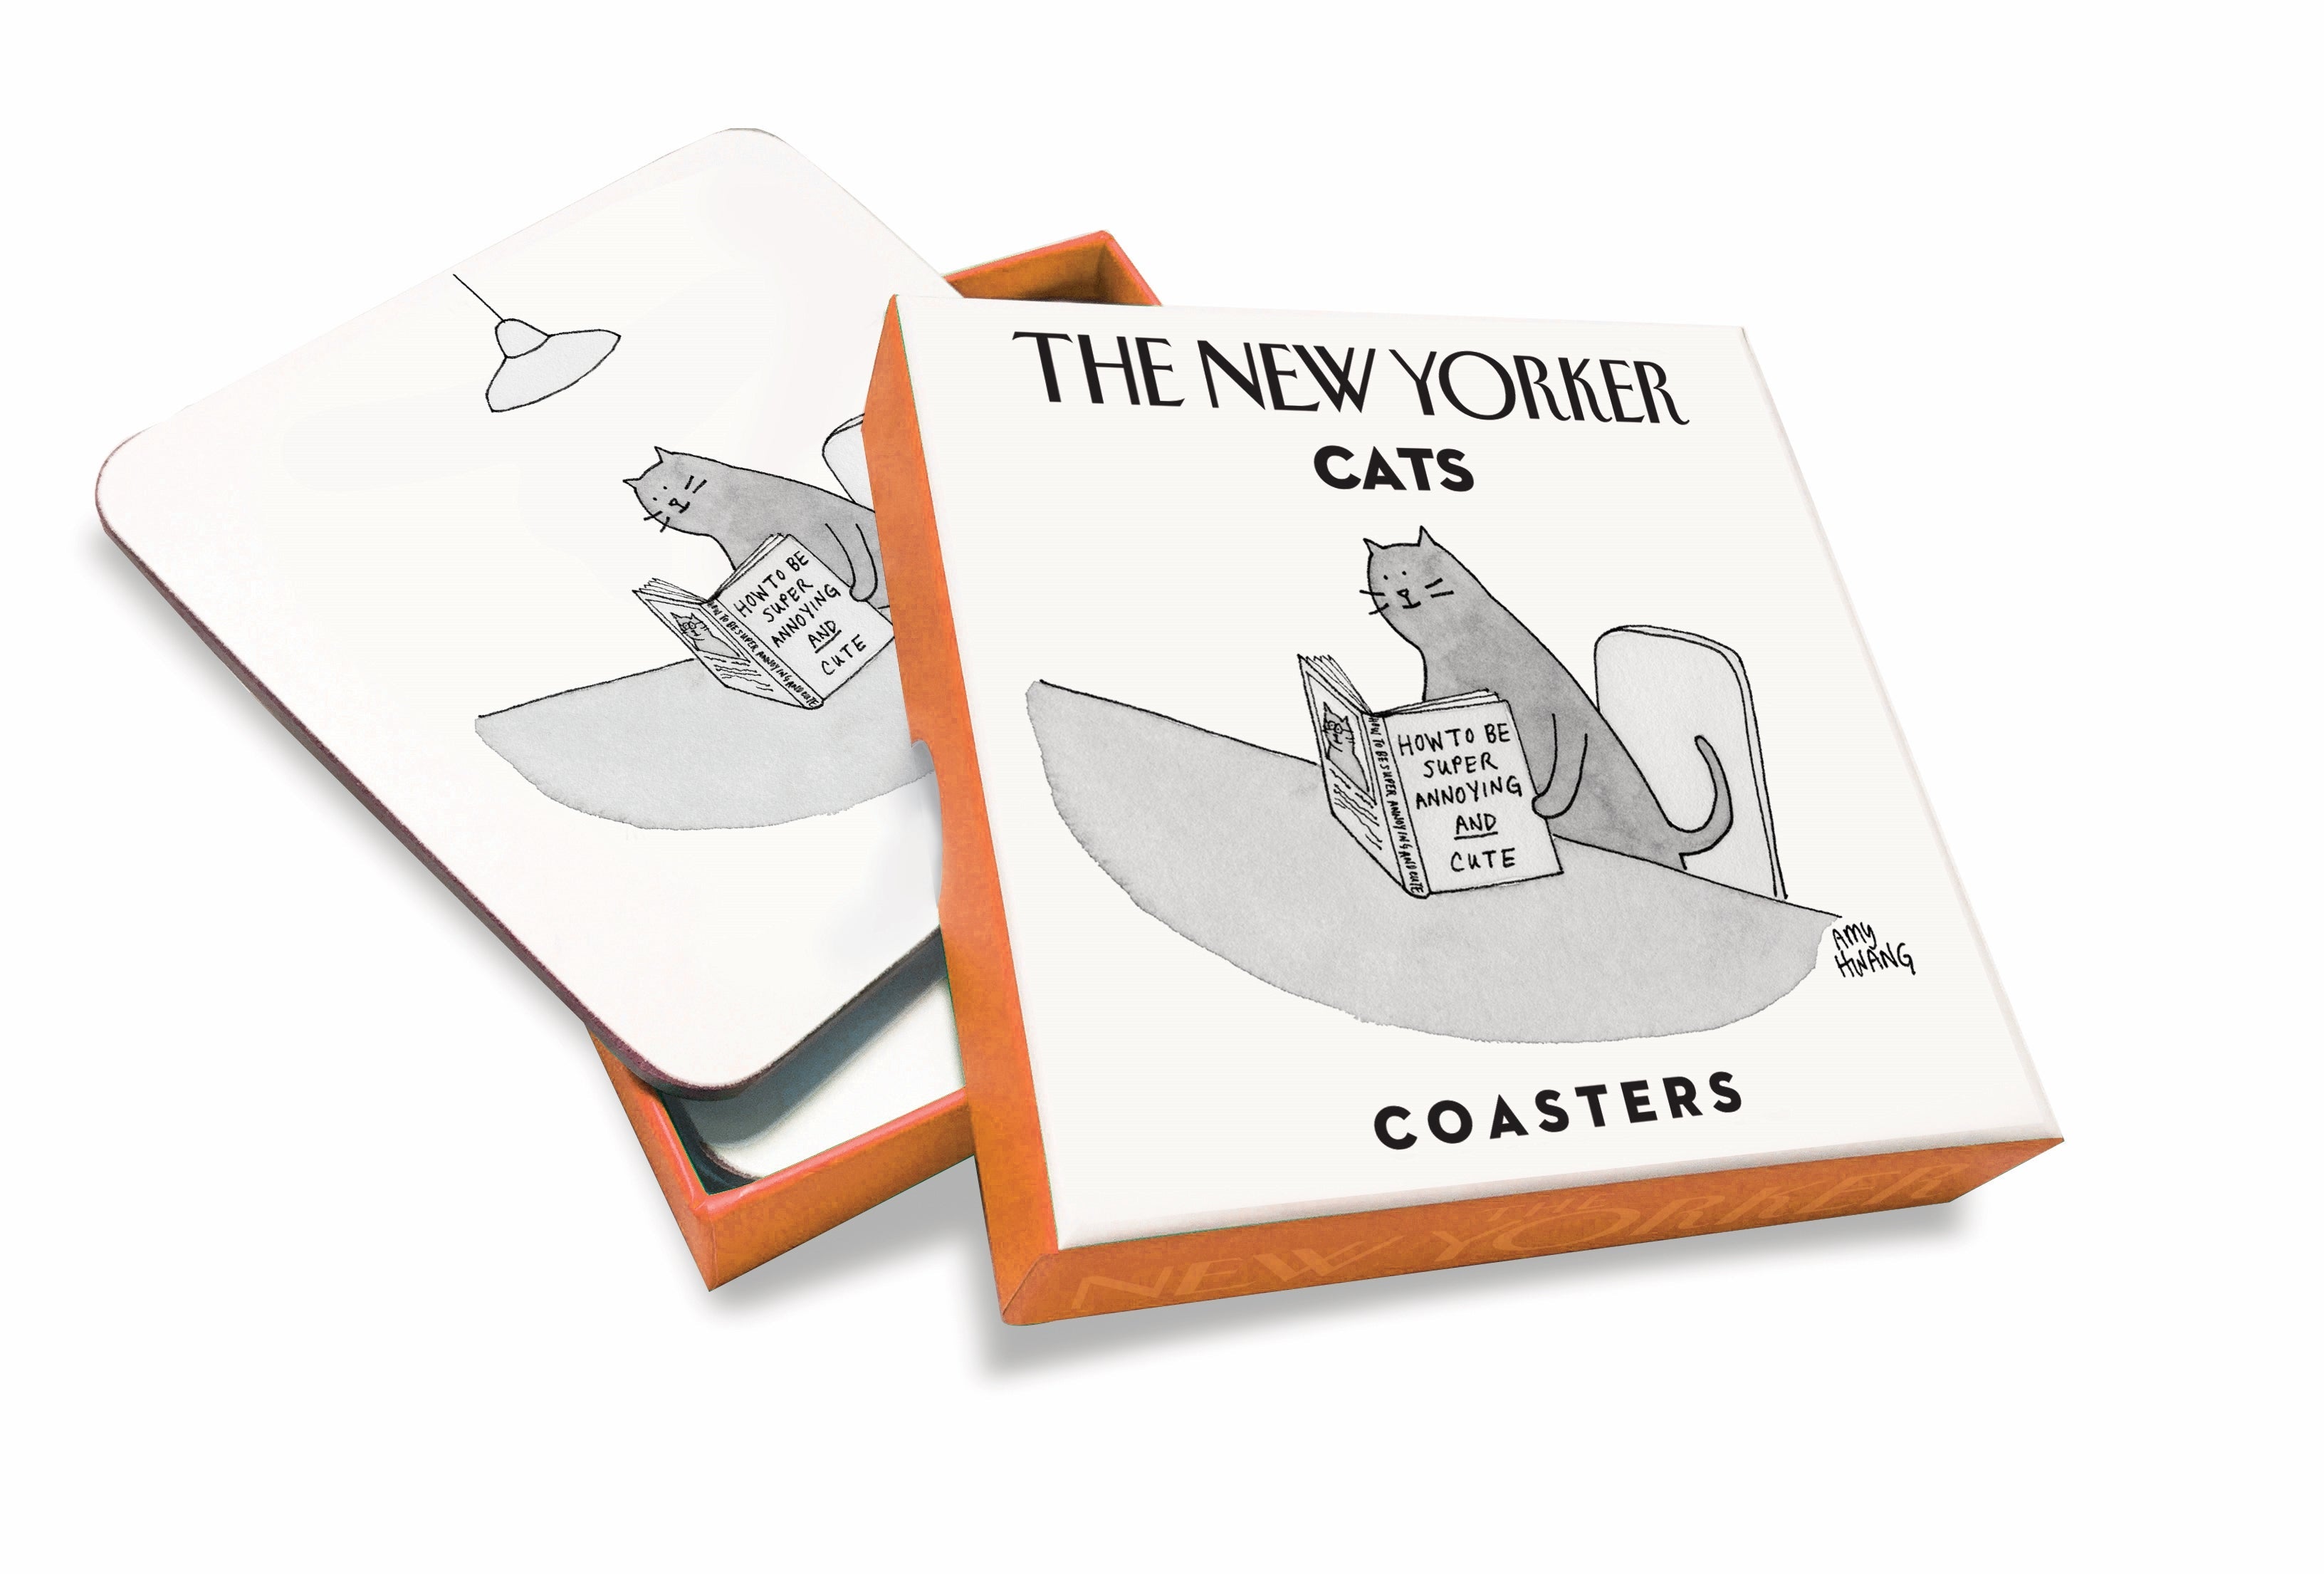 Cats (By New Yorker) - Coasters